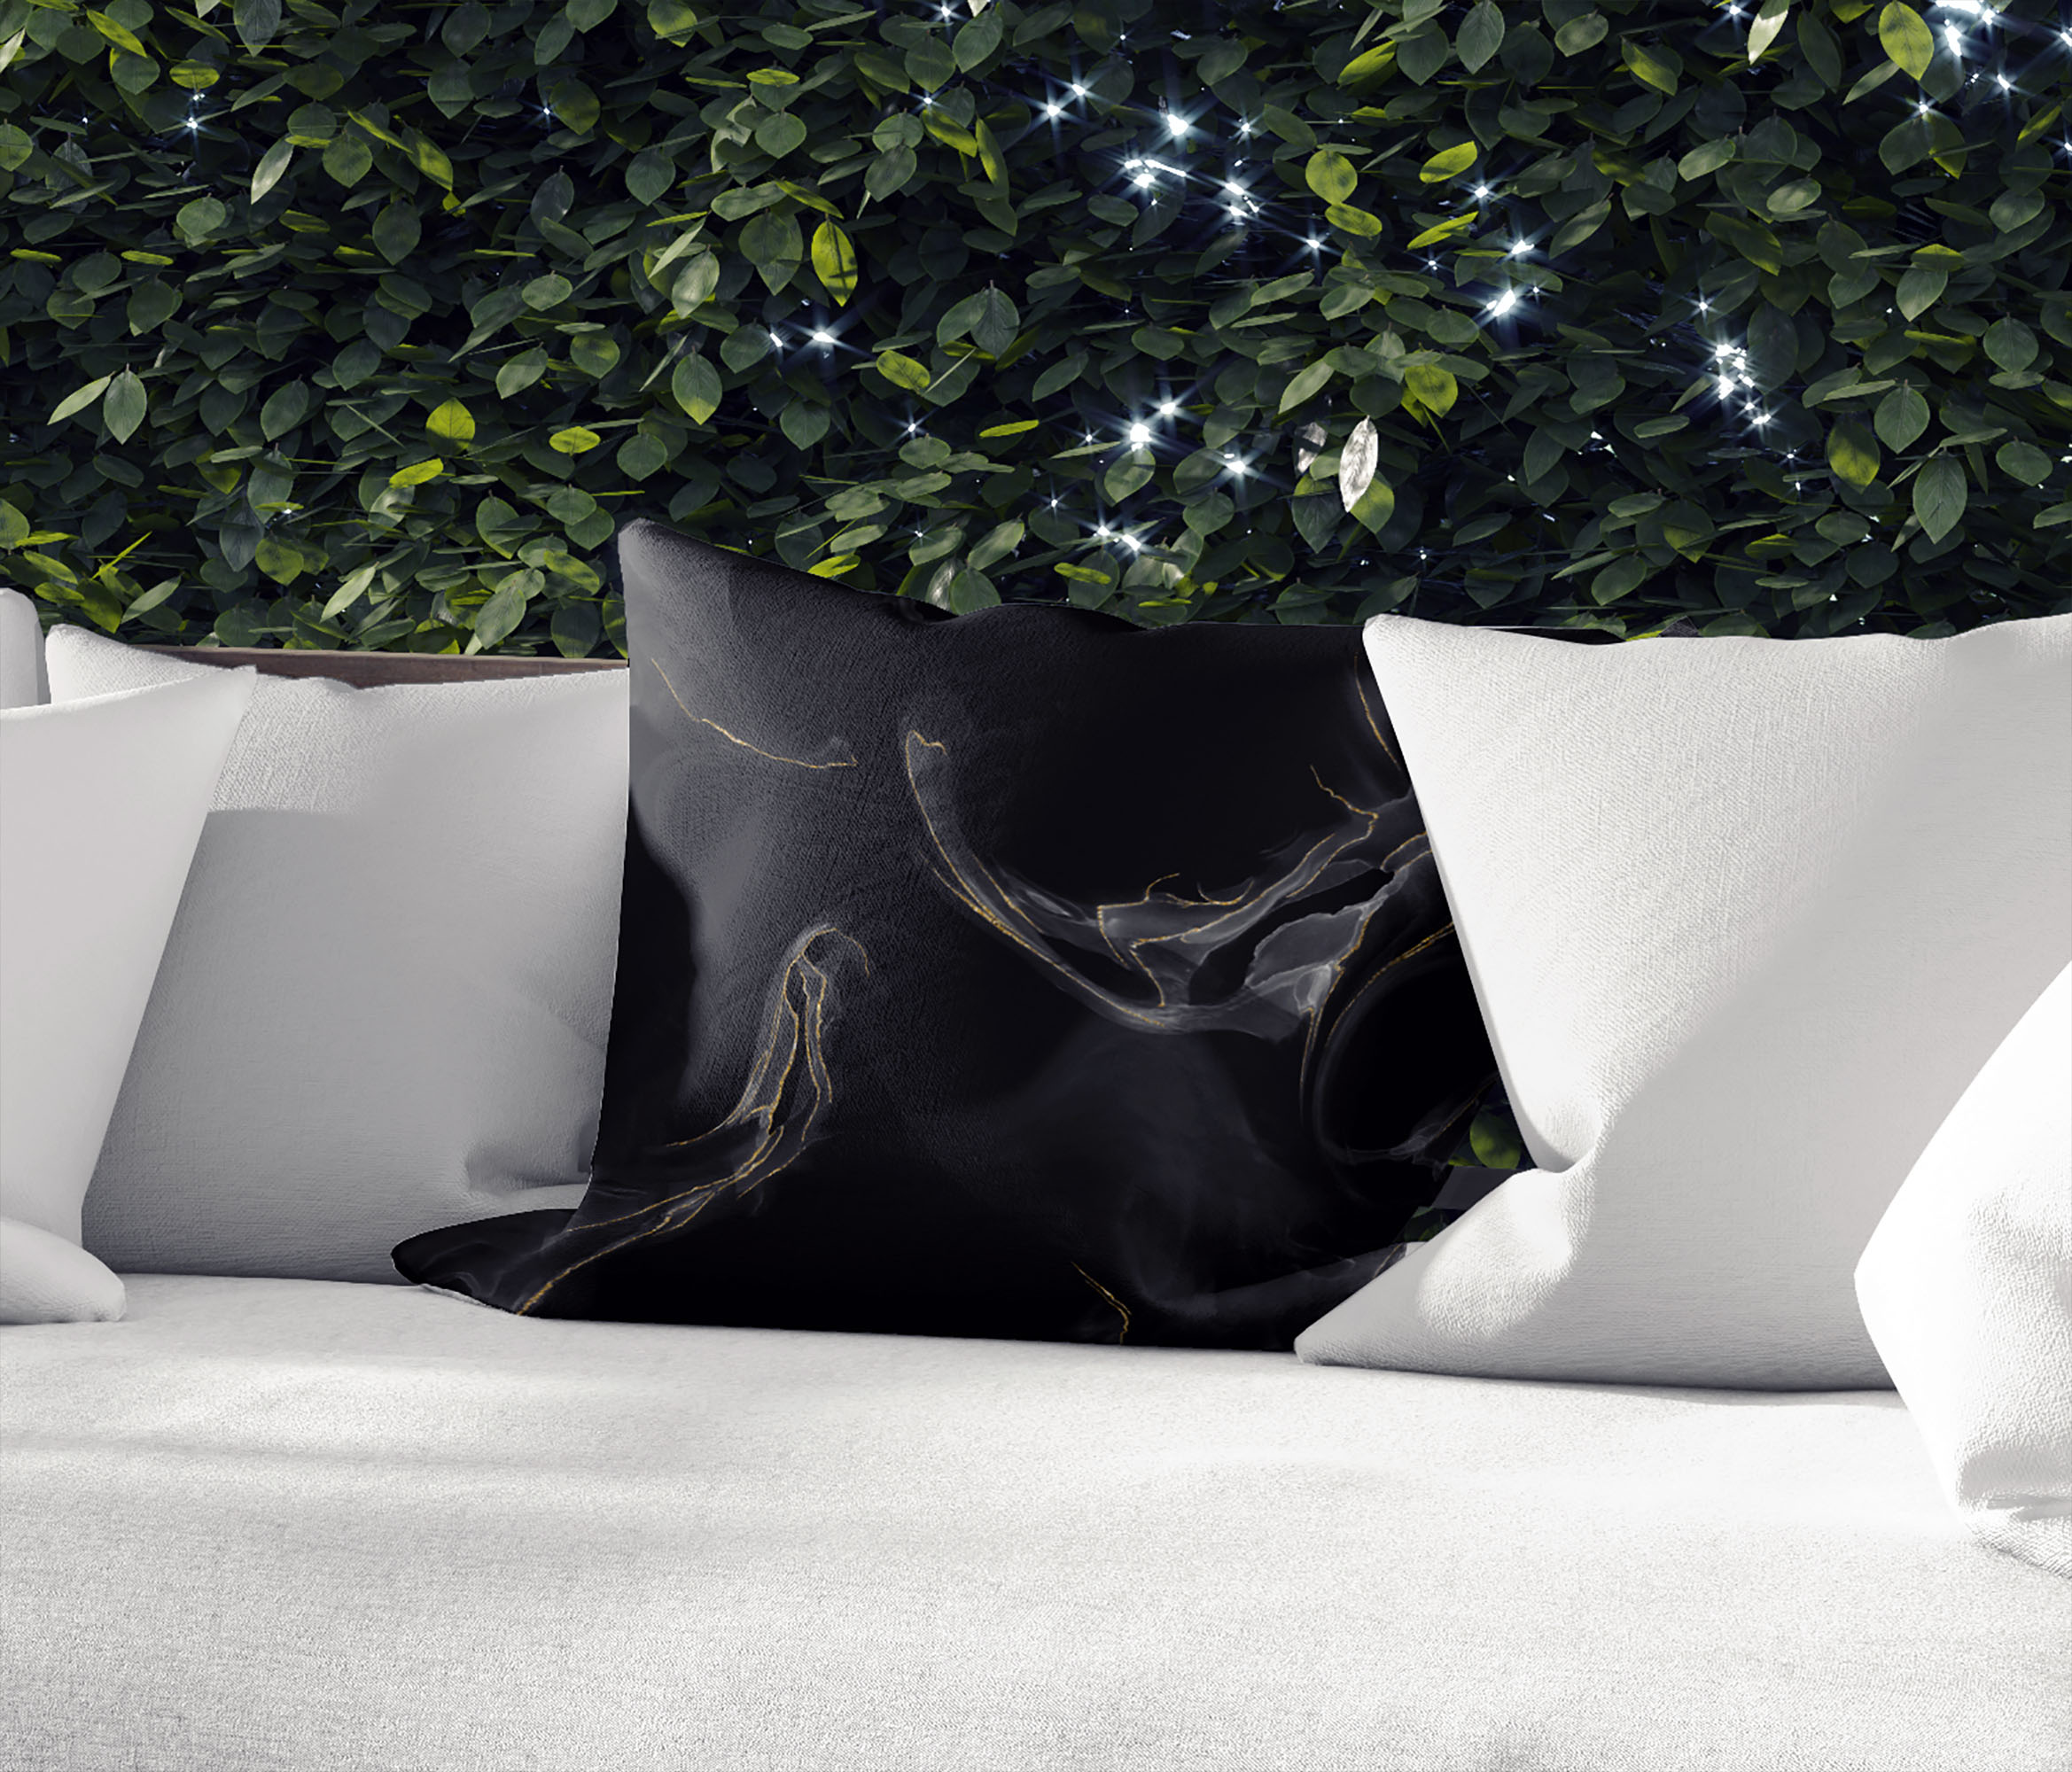 Marble Black Outdoor Pillow by Kavka Designs - image 5 of 5